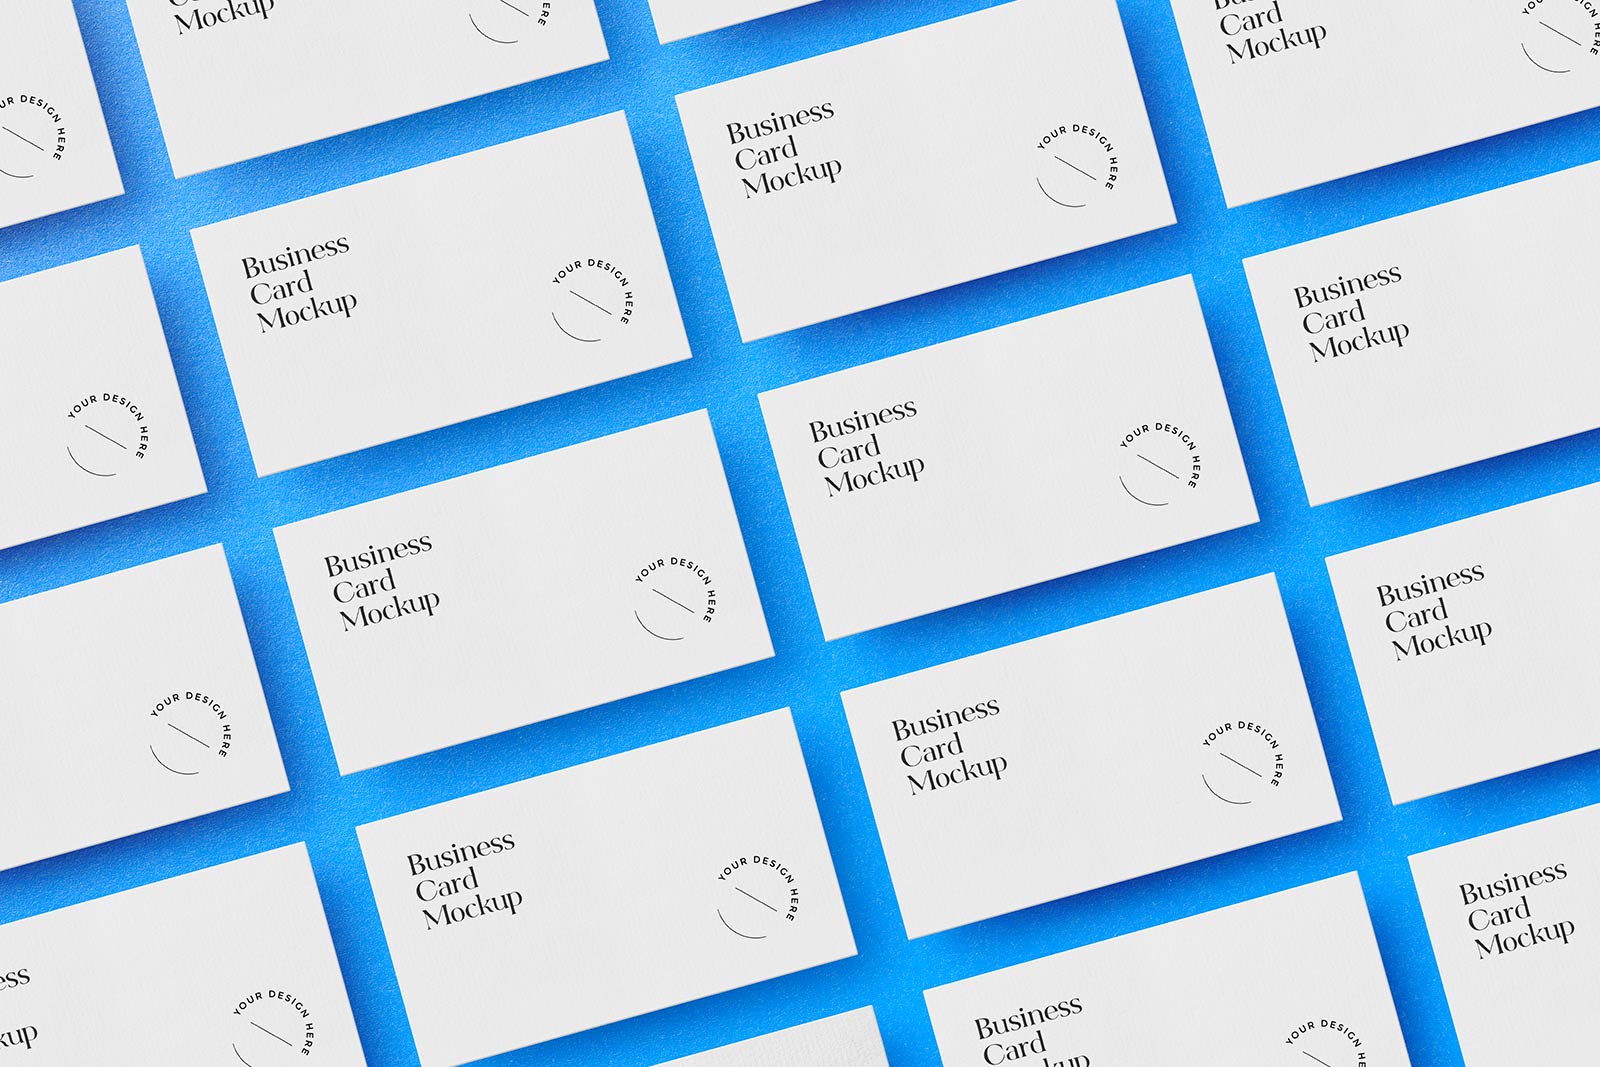 Free-Laid-Out-Grid-Business-Card-Mockup-PSD